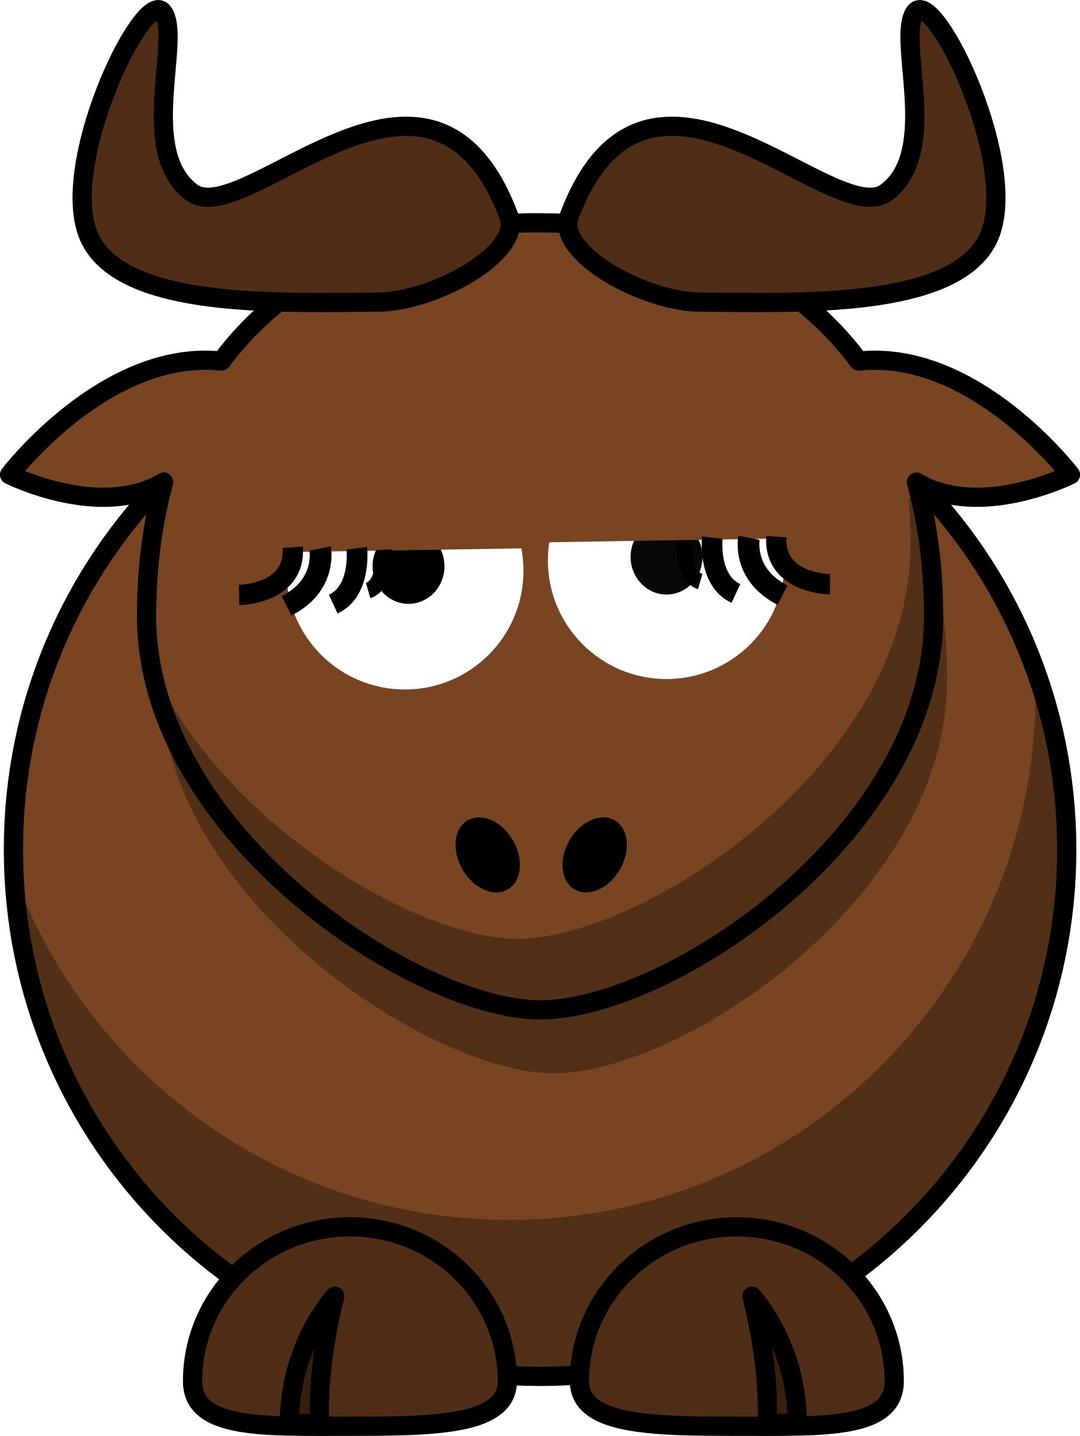 Cartoon Gnu is Disappoint png transparent